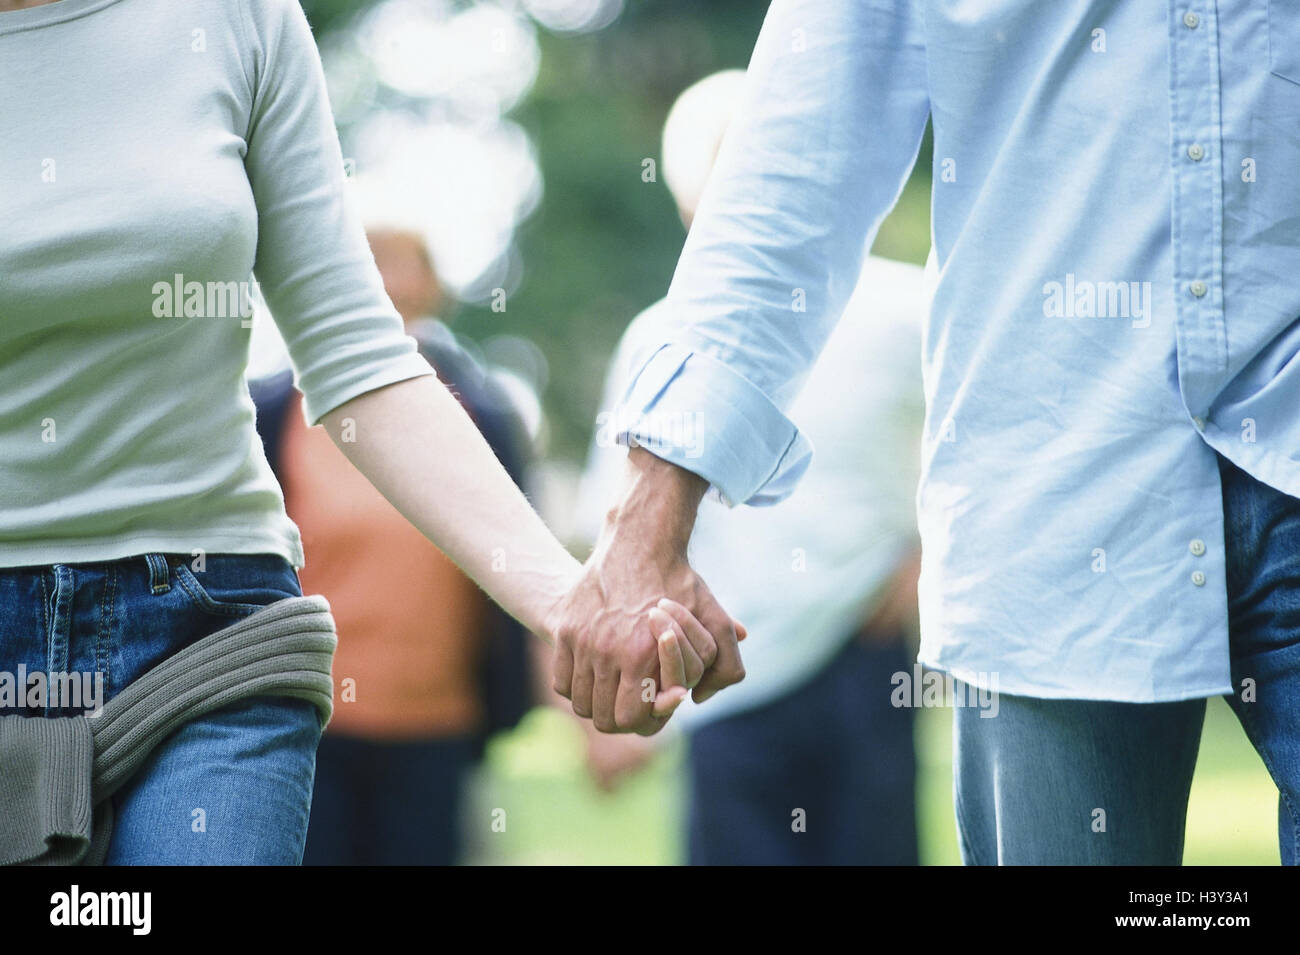 Couple, walk, hand in hand, detail, model released, partnership, partner, detail, hands, hold, go for of a walk, hold hands, affection, love, touch, leisure time, cohesion, very close Stock Photo